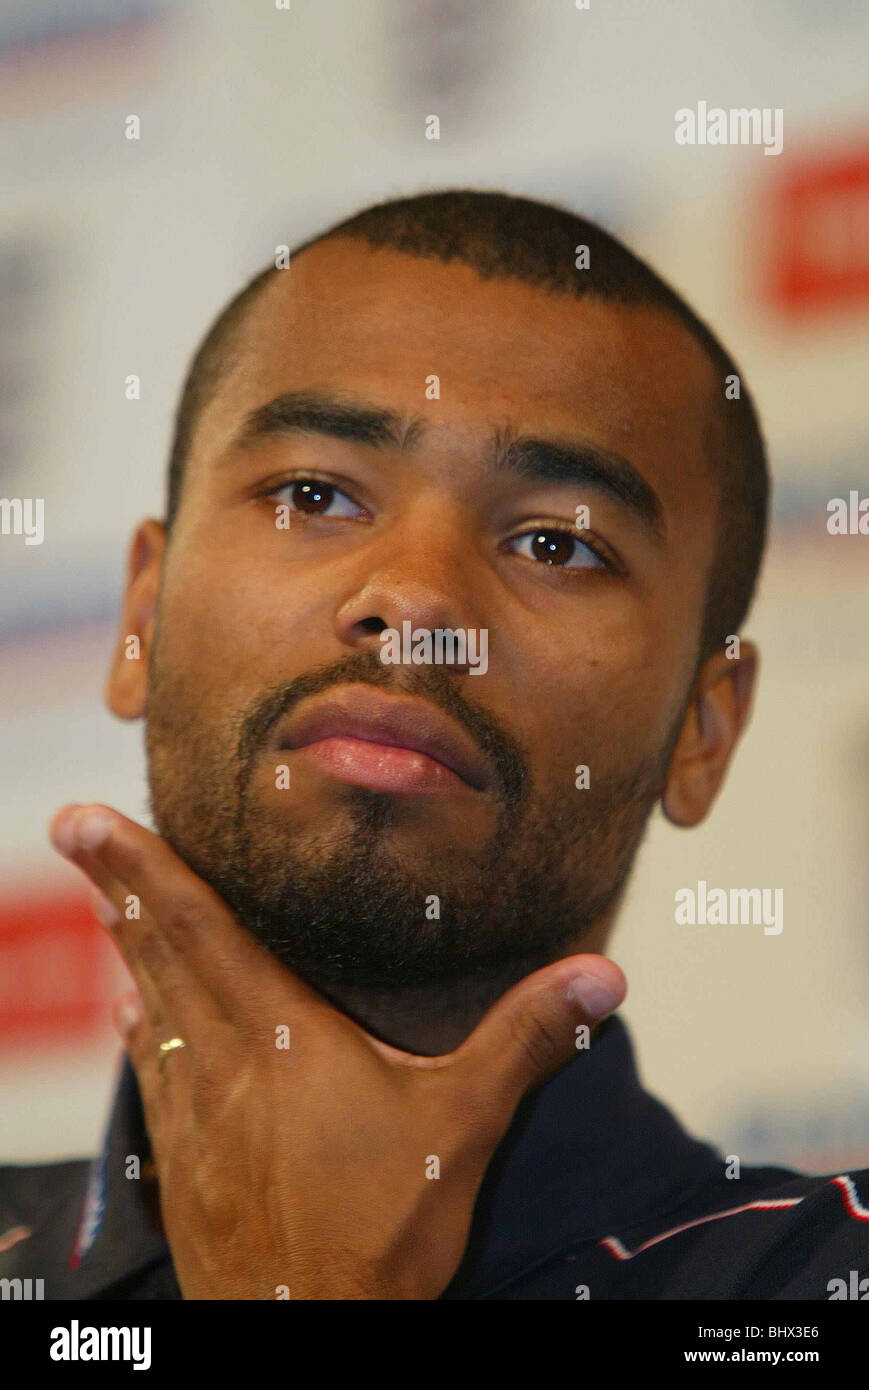 Ashley Cole June 2002 England Player in reflective mood Pictured at Training Camp Awaji Island Japan ©Mirrorpix Stock Photo